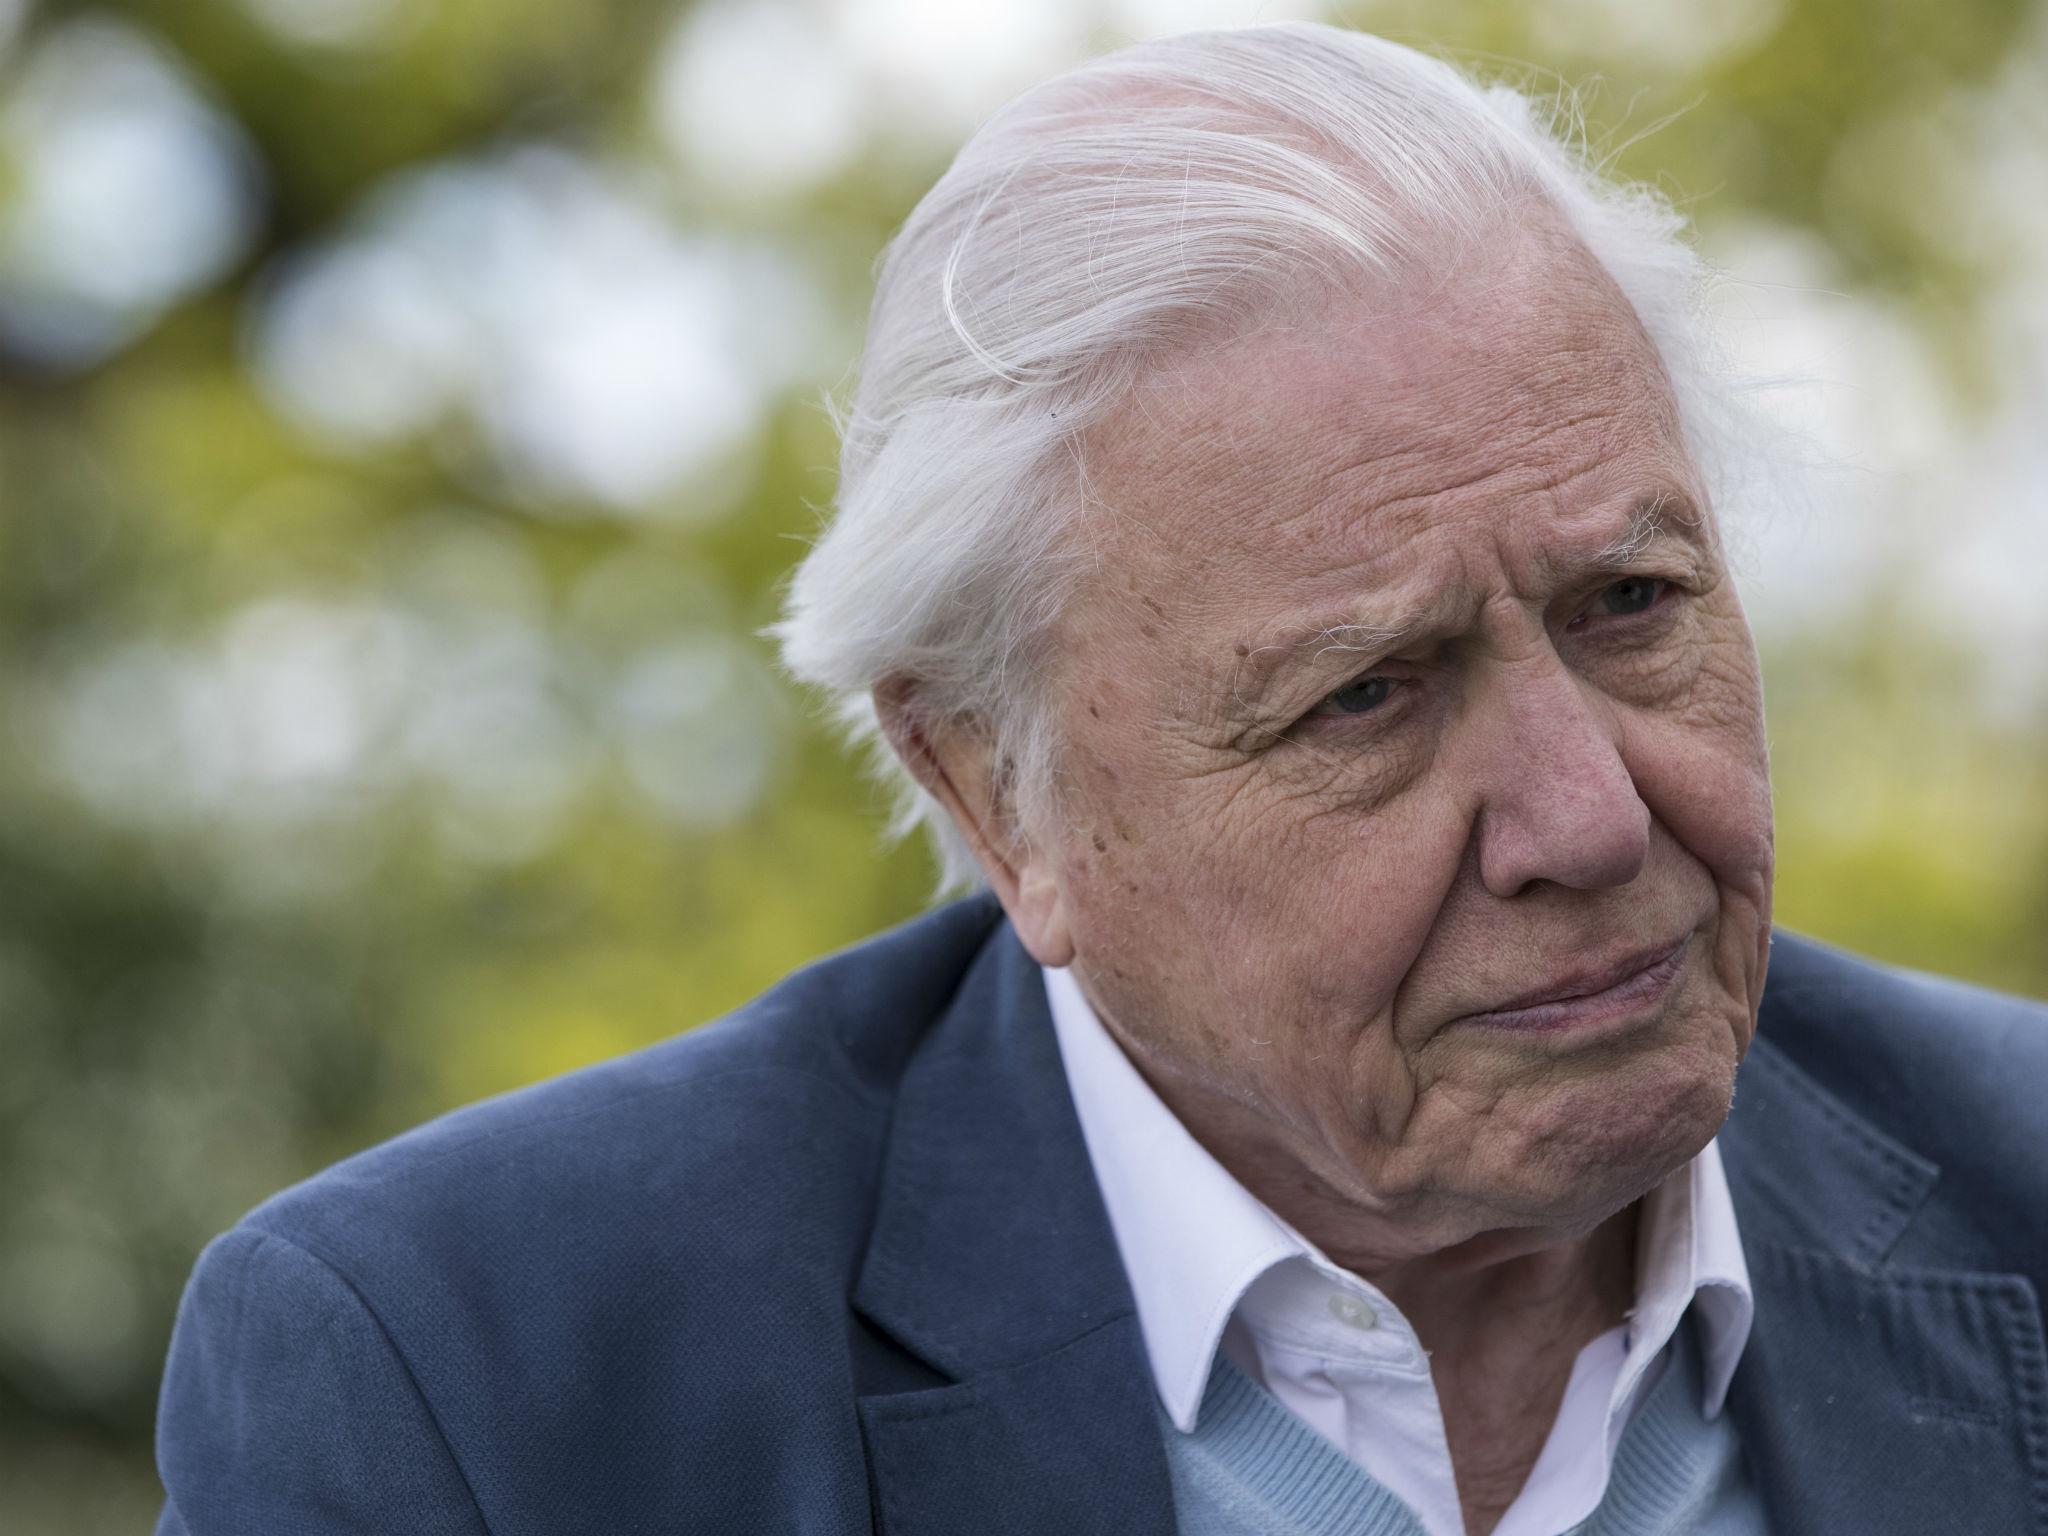 Sir David Attenborough says he has hope for the environment